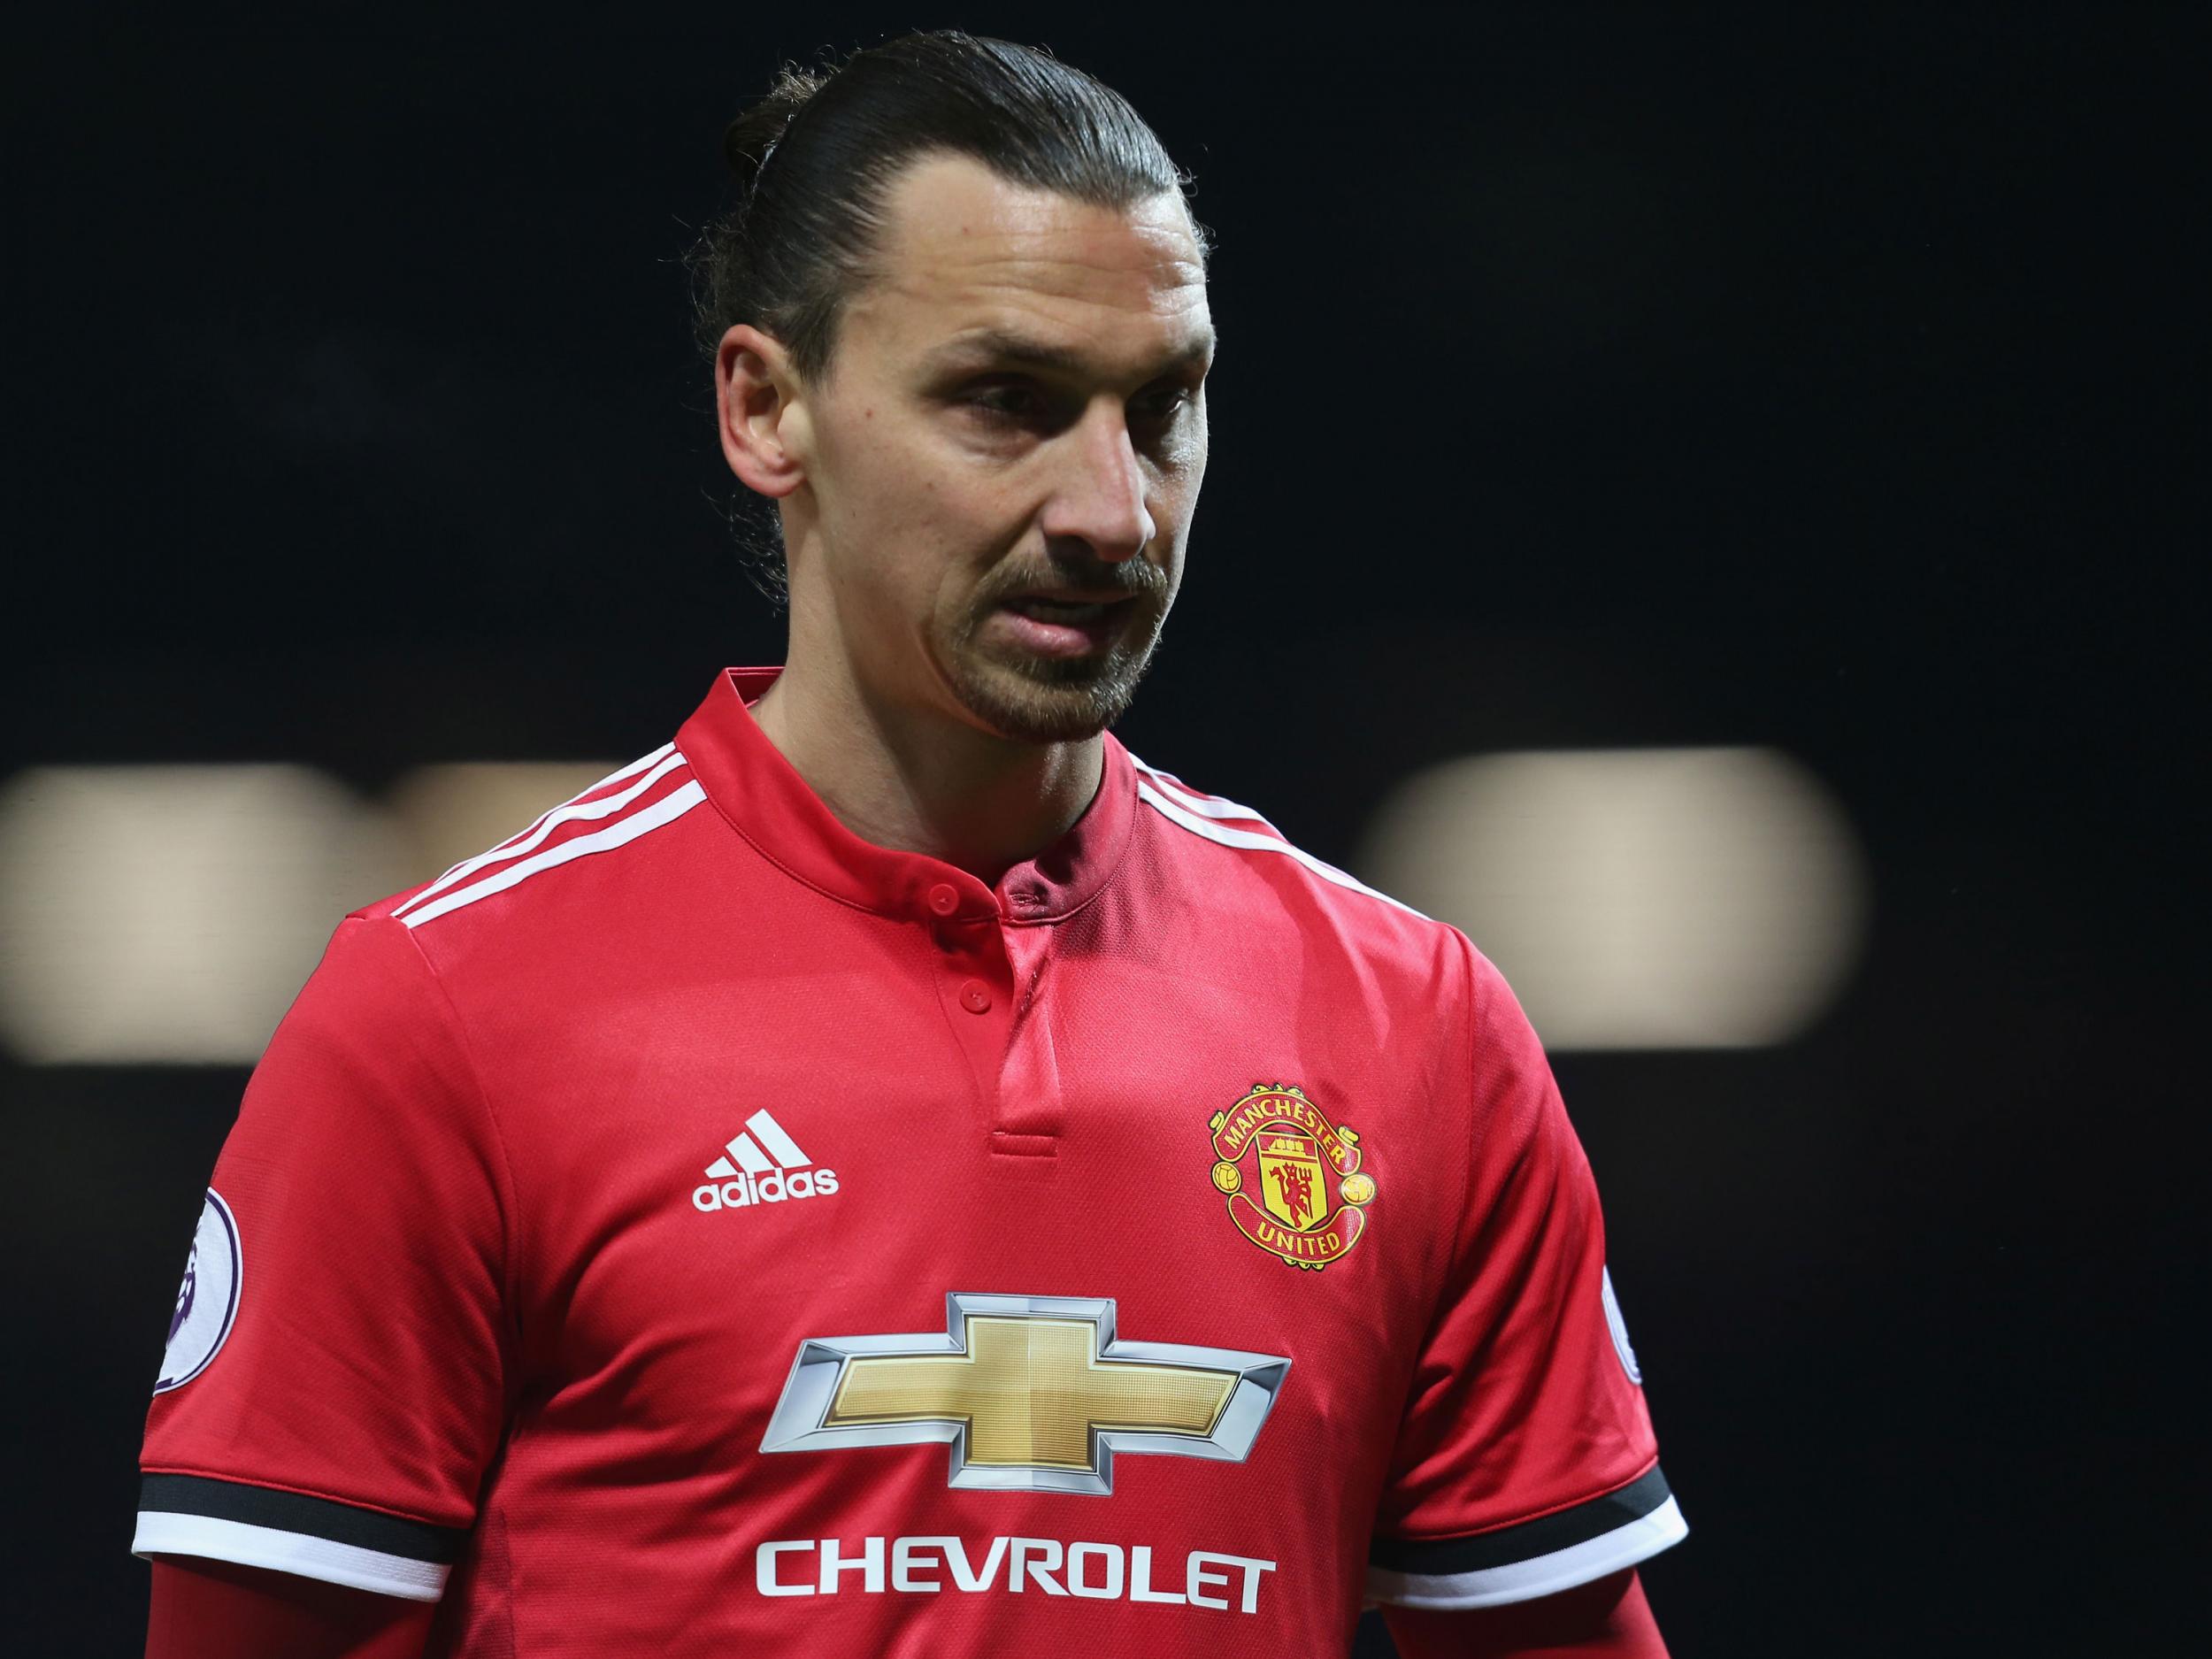 Zlatan Ibrahimovic is expected to leave Manchester United at the end of the season